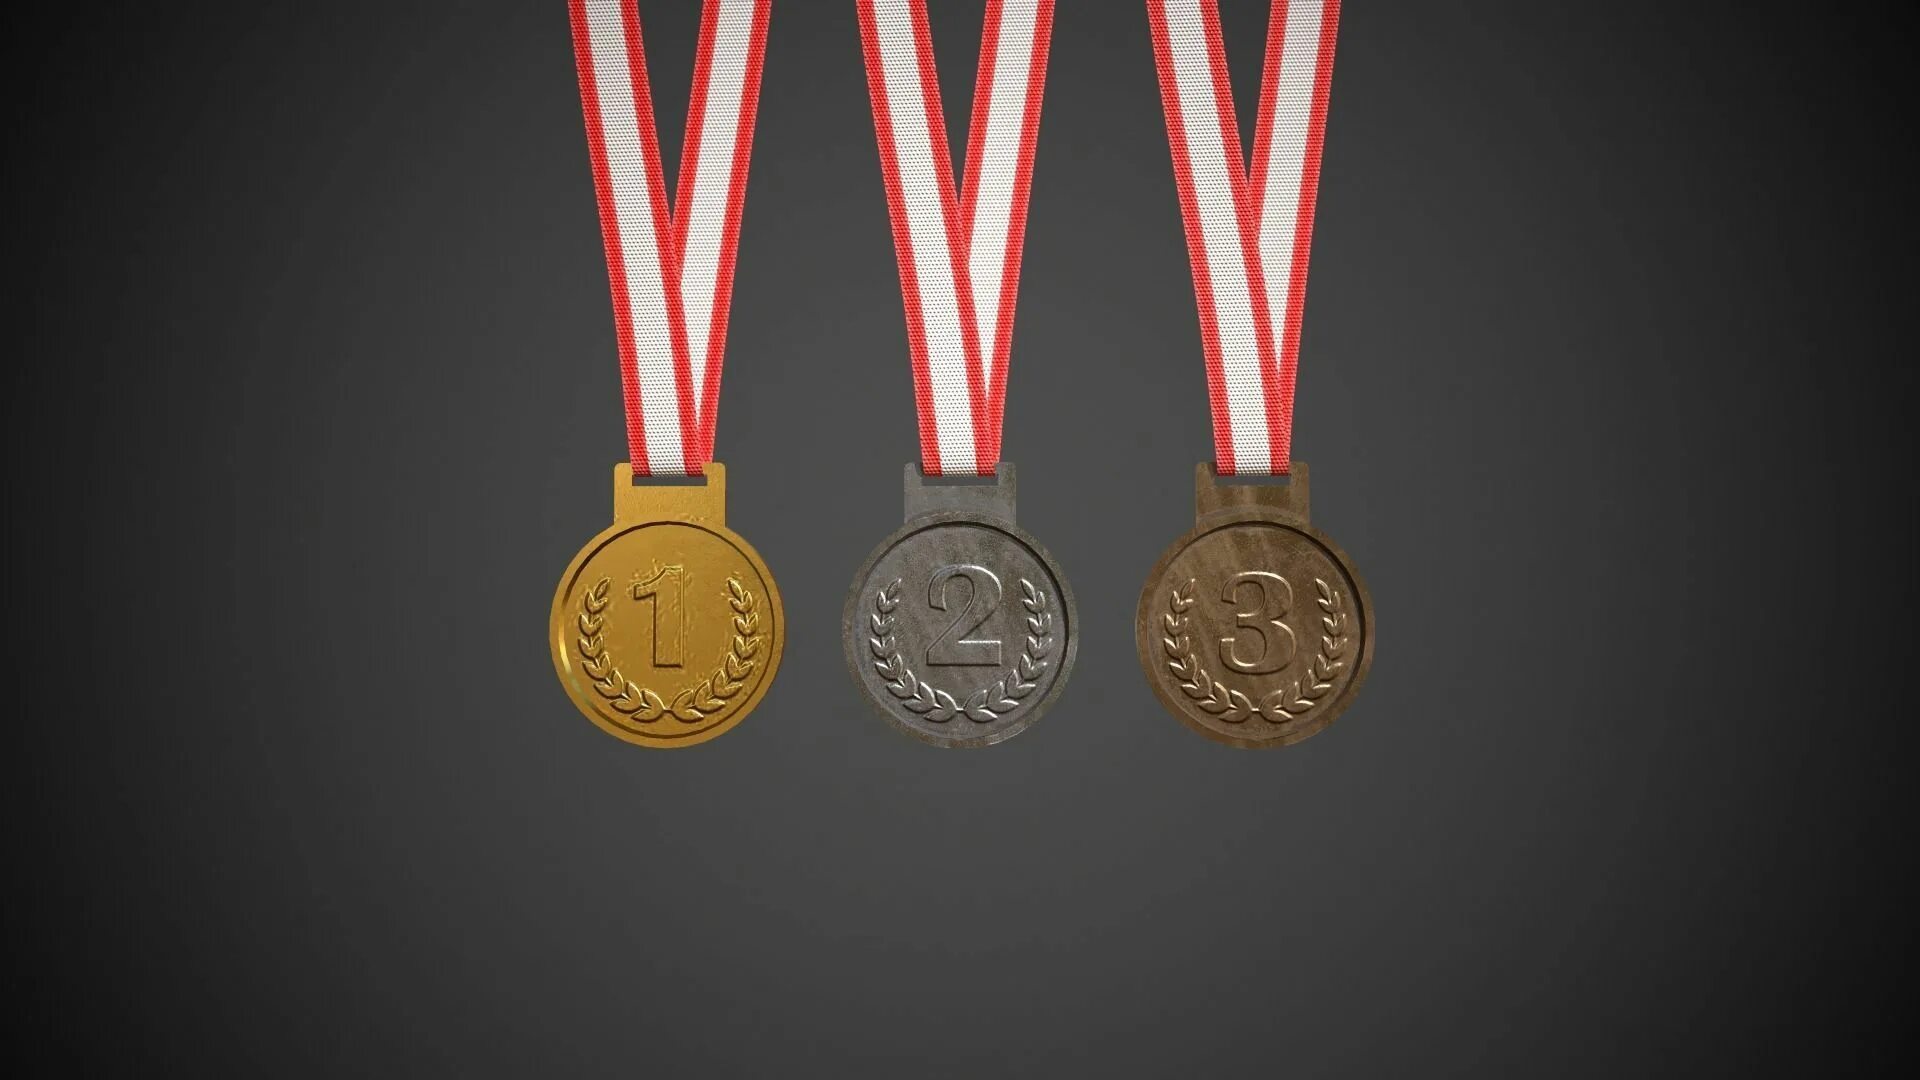 Sporting medals